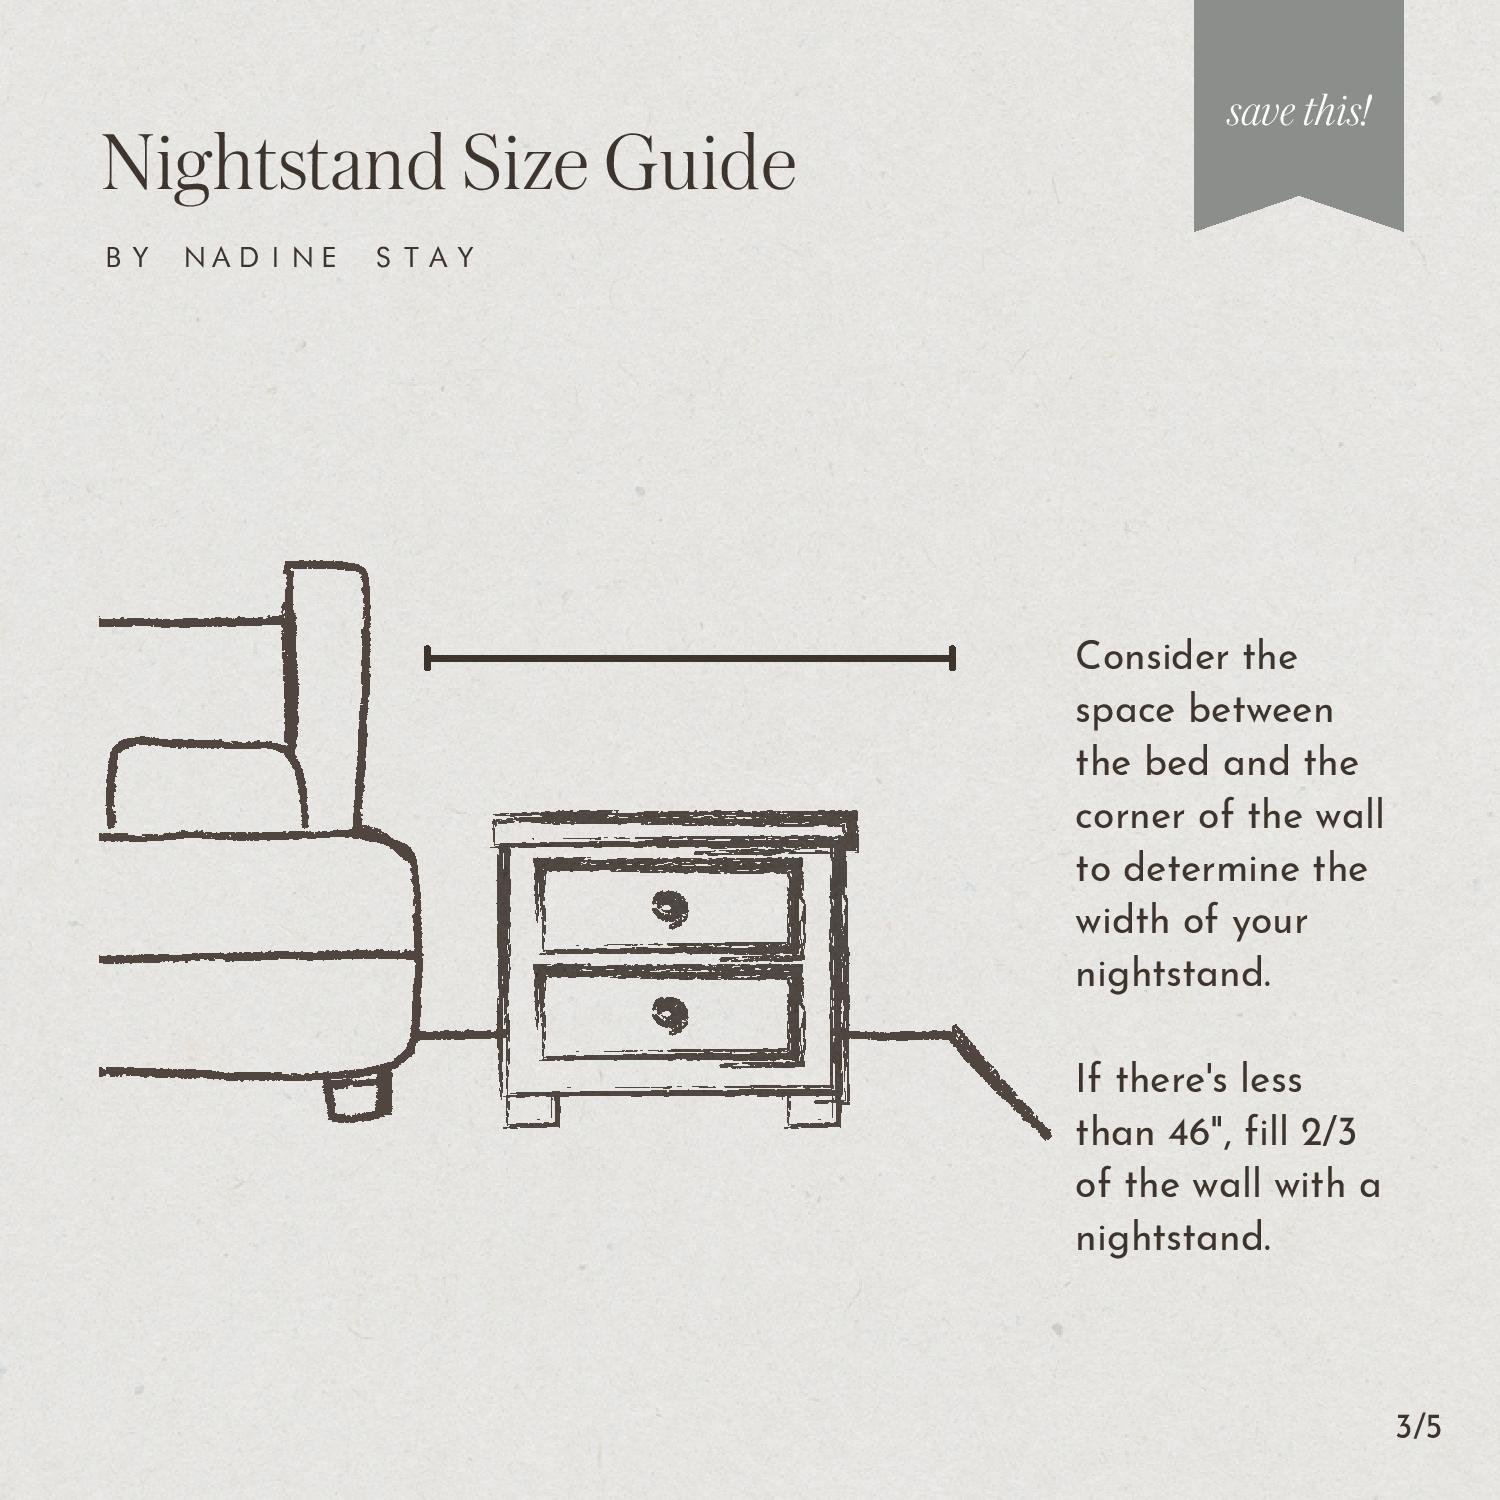 Nightstand Size & Placement Guide by Nadine Stay | What size nightstand you should get. Nightstand size guide. How to pick the right size nightstand. Nightstand width guide.